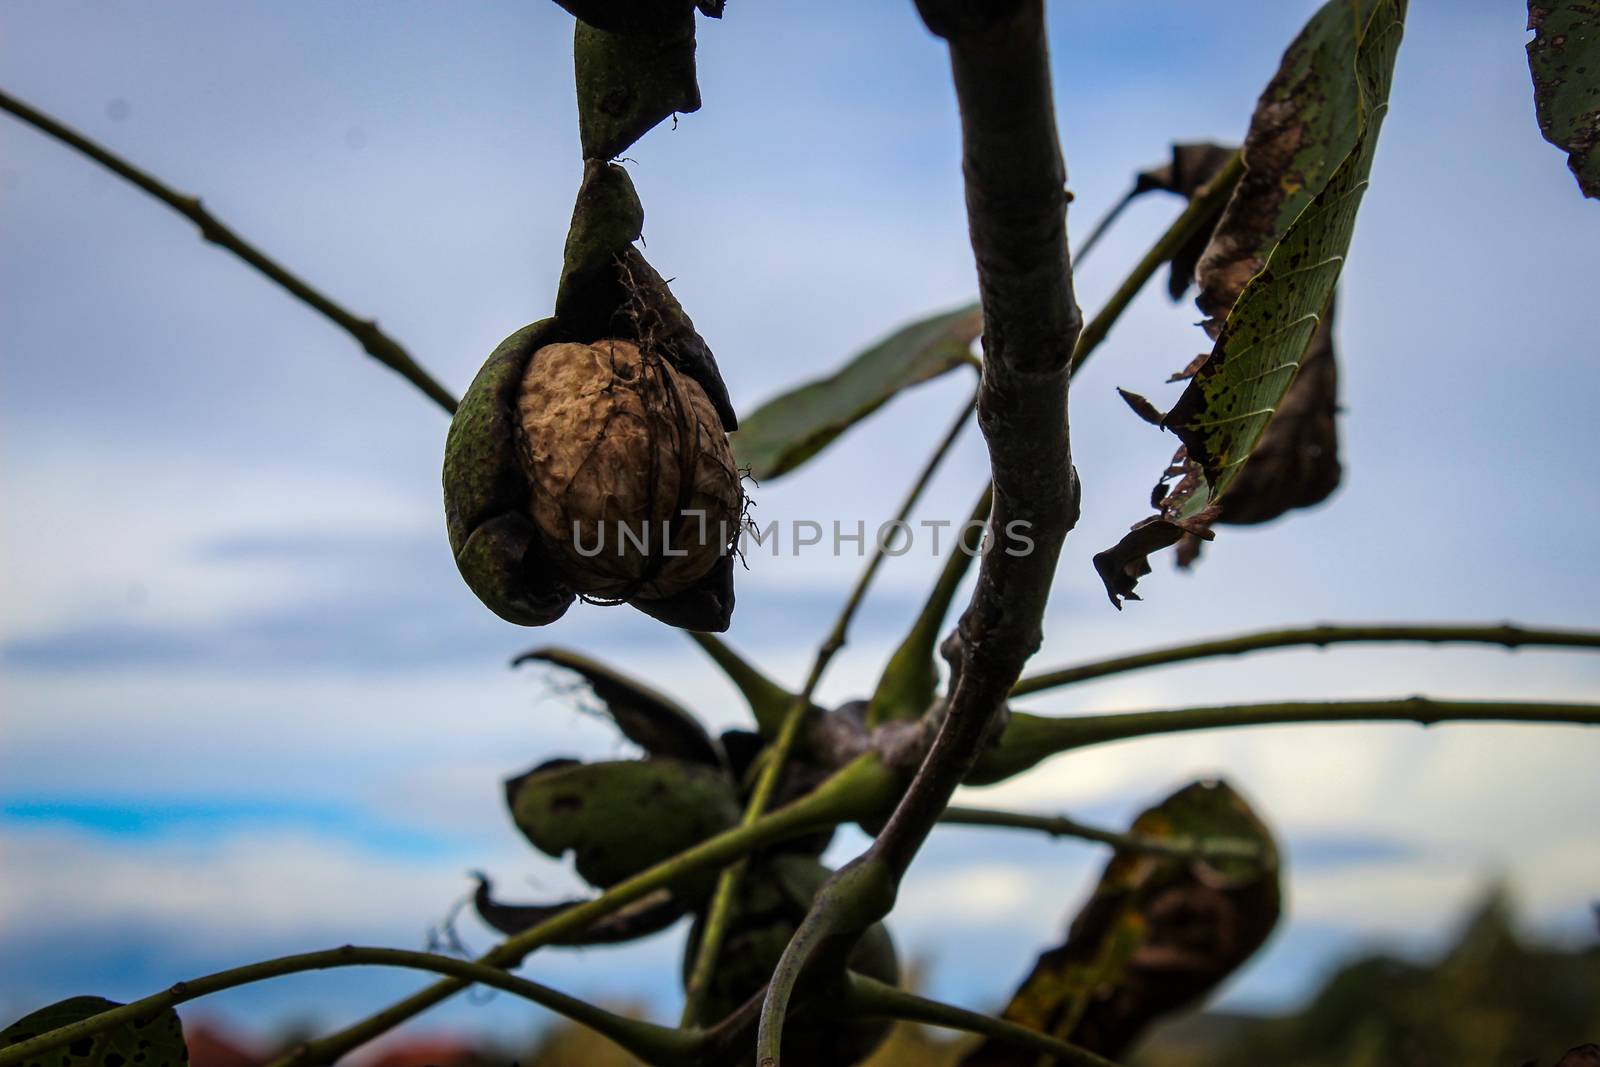 A walnut on a branch that almost came out of a green shell, in the background a cloudy sky. by mahirrov